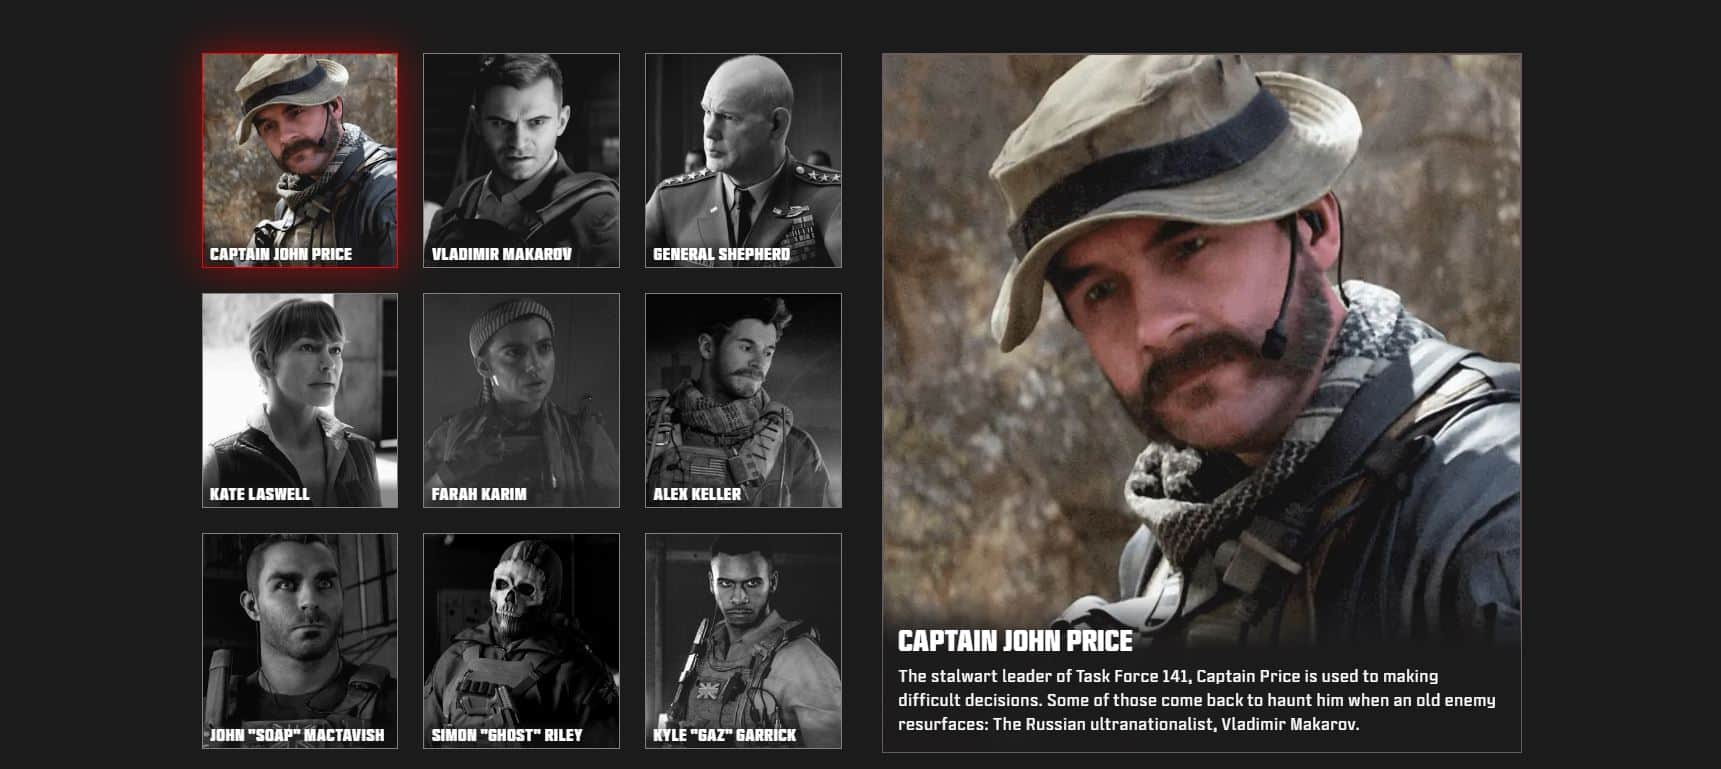 A picture of a man with a mustache and a hat from the MW3 characters list.